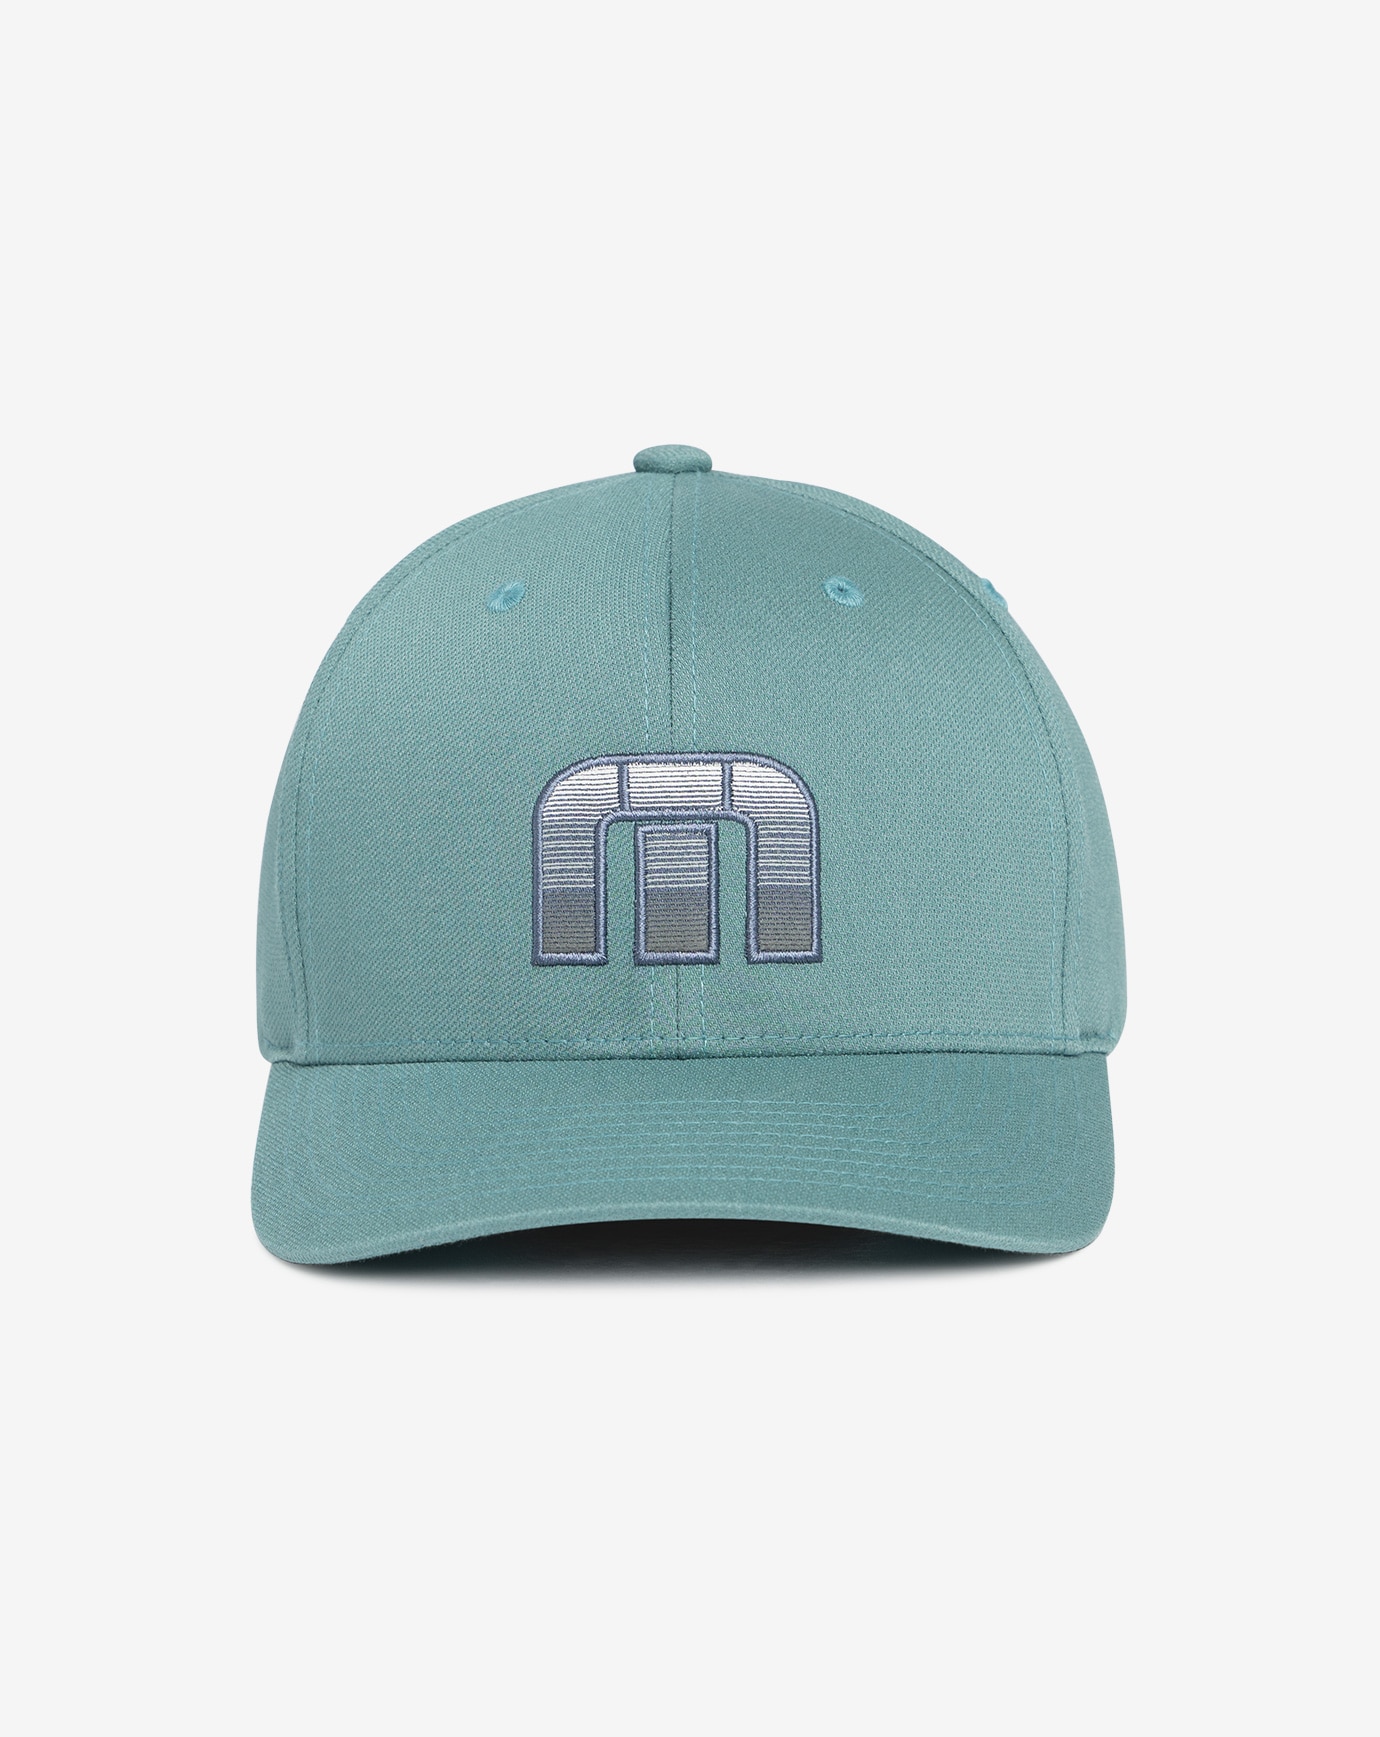 LIVE BLIND YOUTH HAT 1